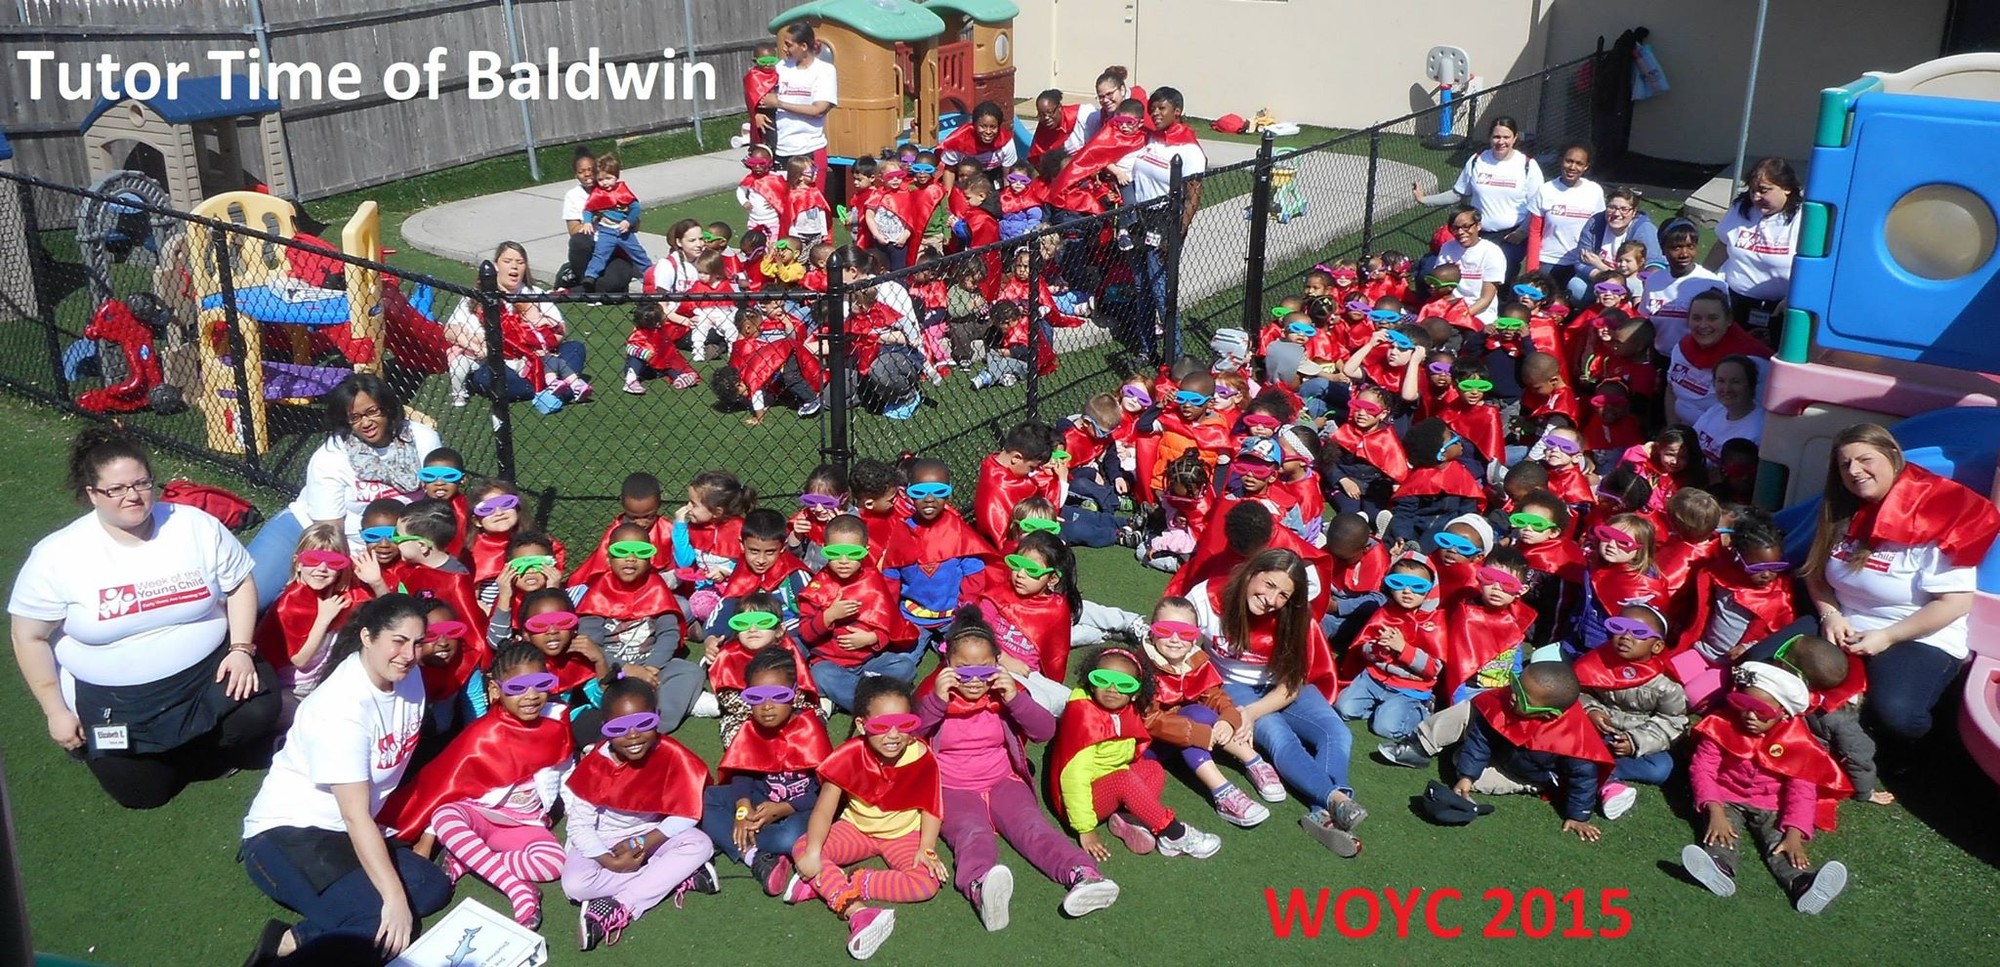 Students at Tutor Time of Baldwin took part in the Week of the Young Child (WOYC) earlier this month.